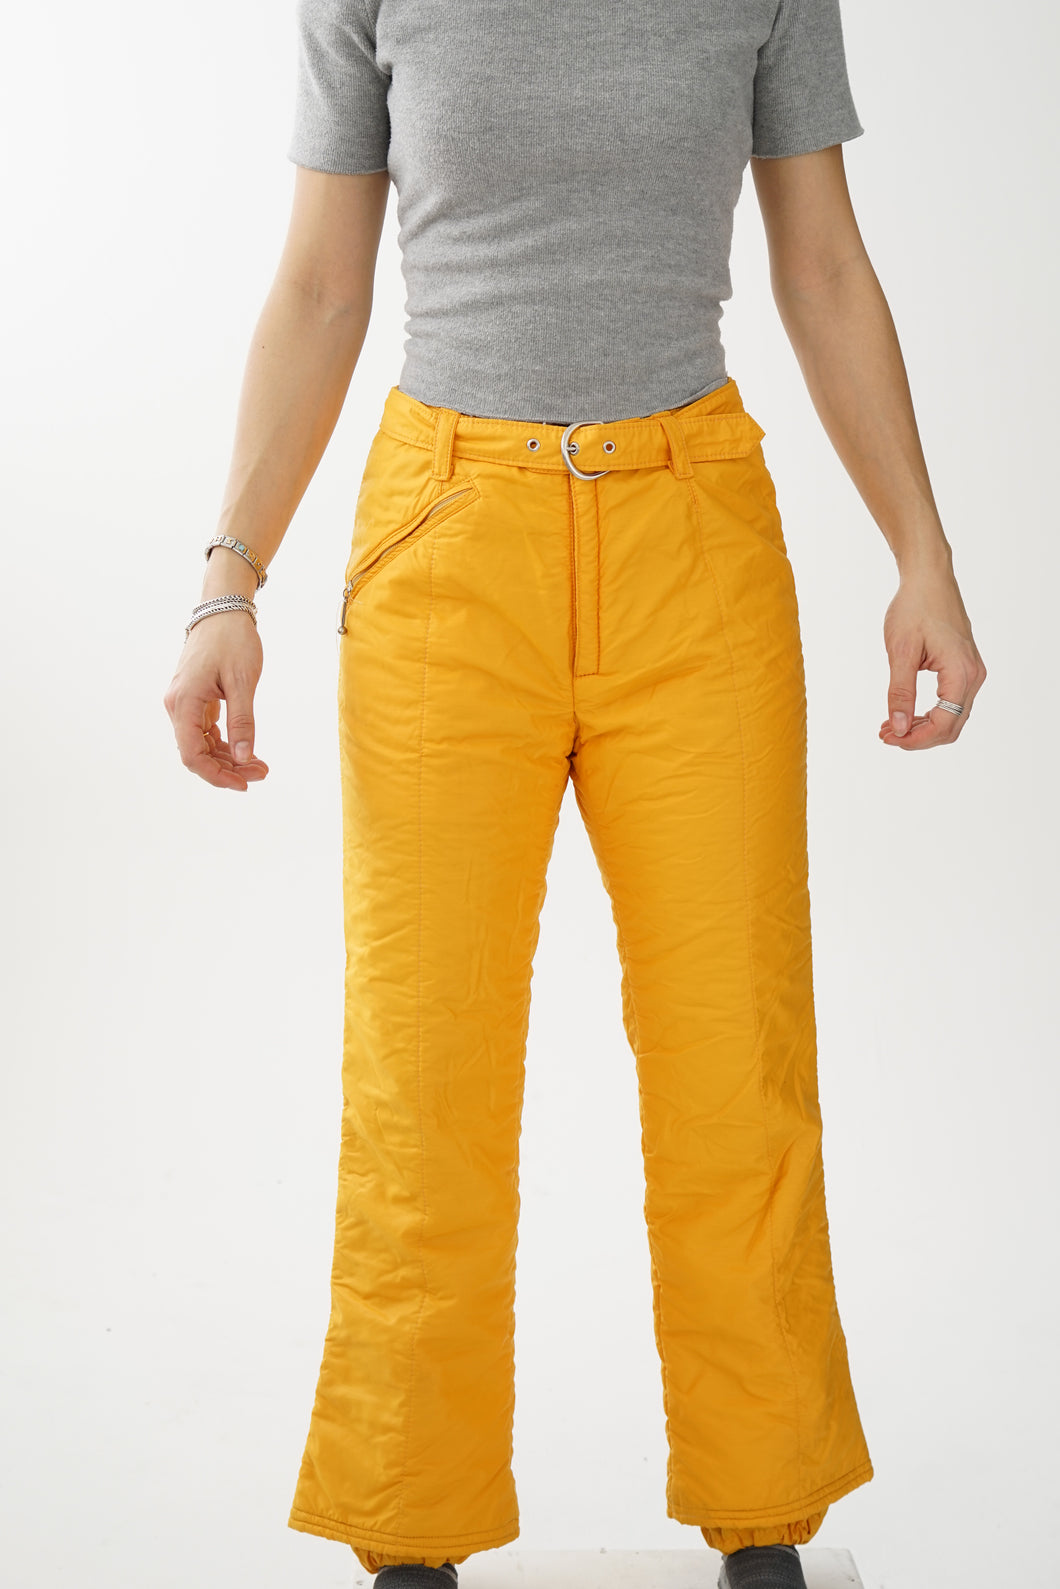 Vintage yellow snow pants for women size S